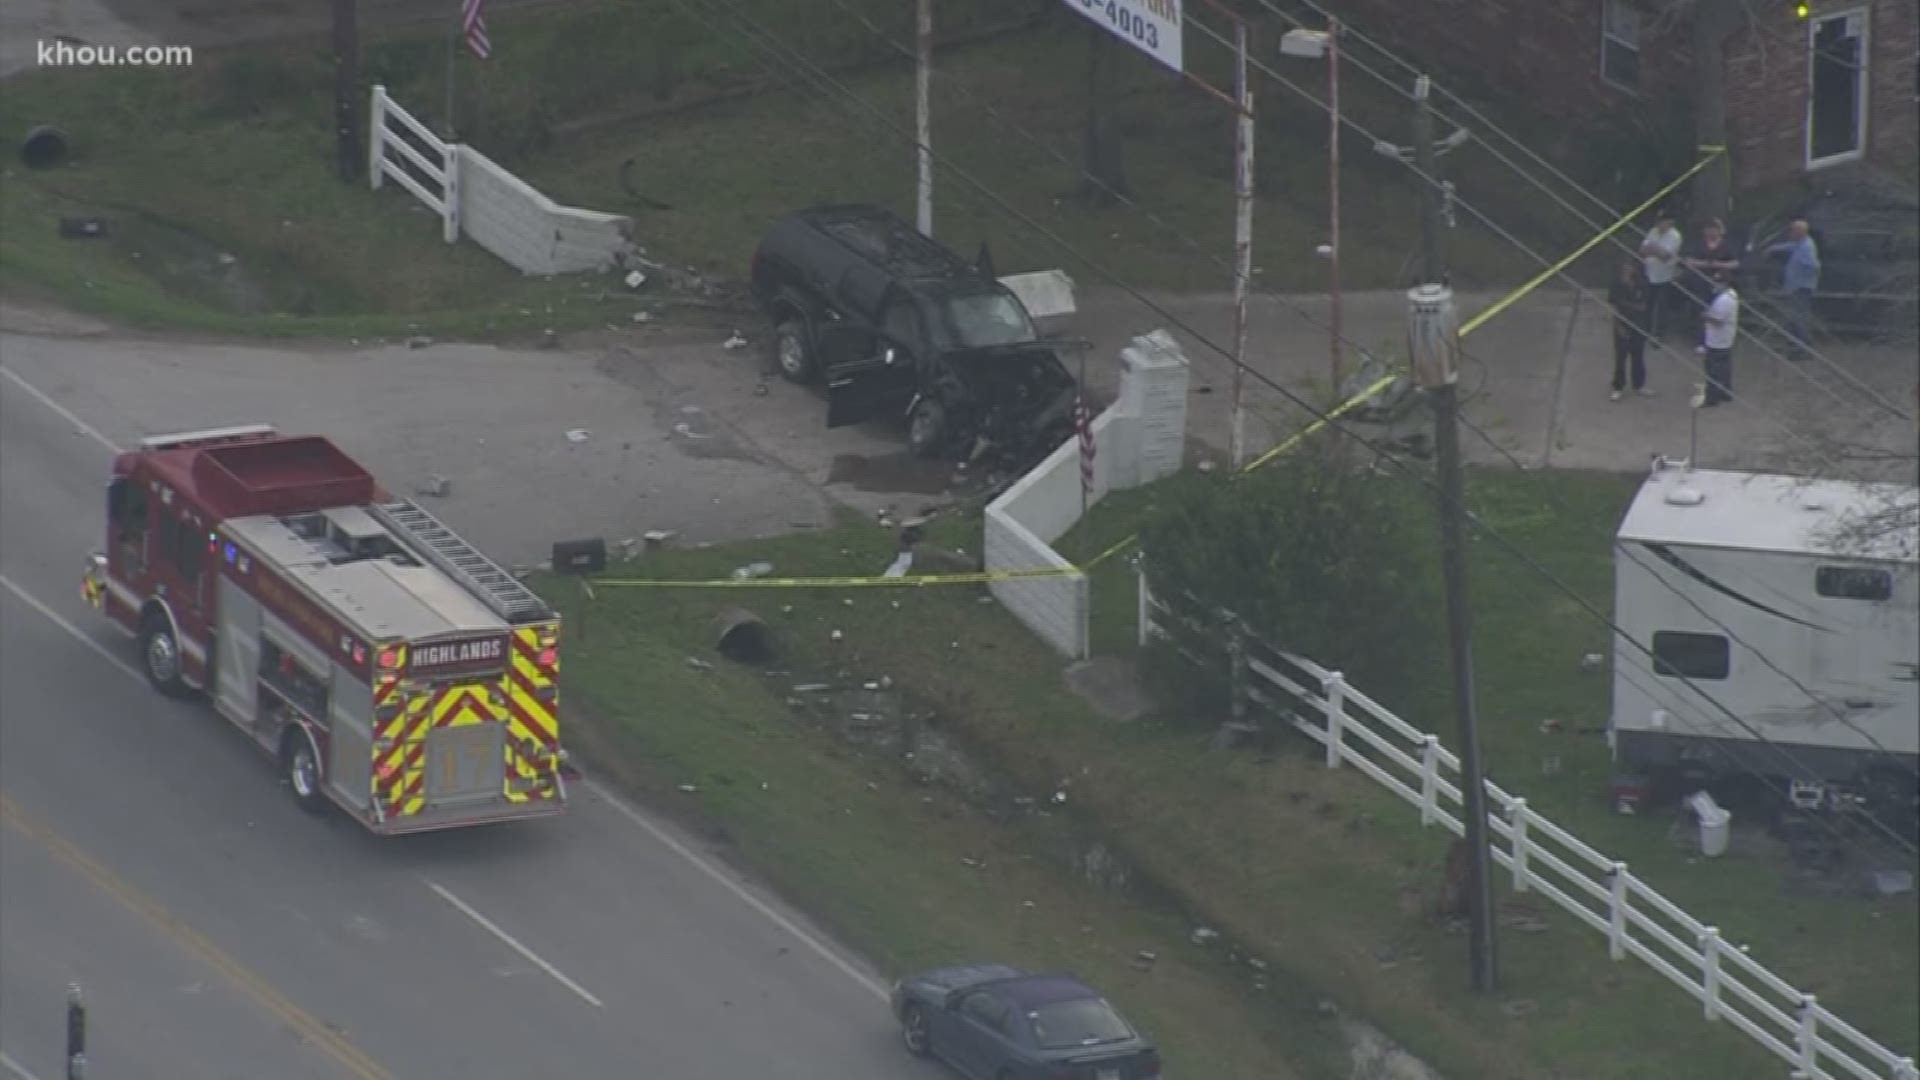 Life Flight is responding to a crash in east Harris County where a vehicle reportedly crashed into a gas meter.